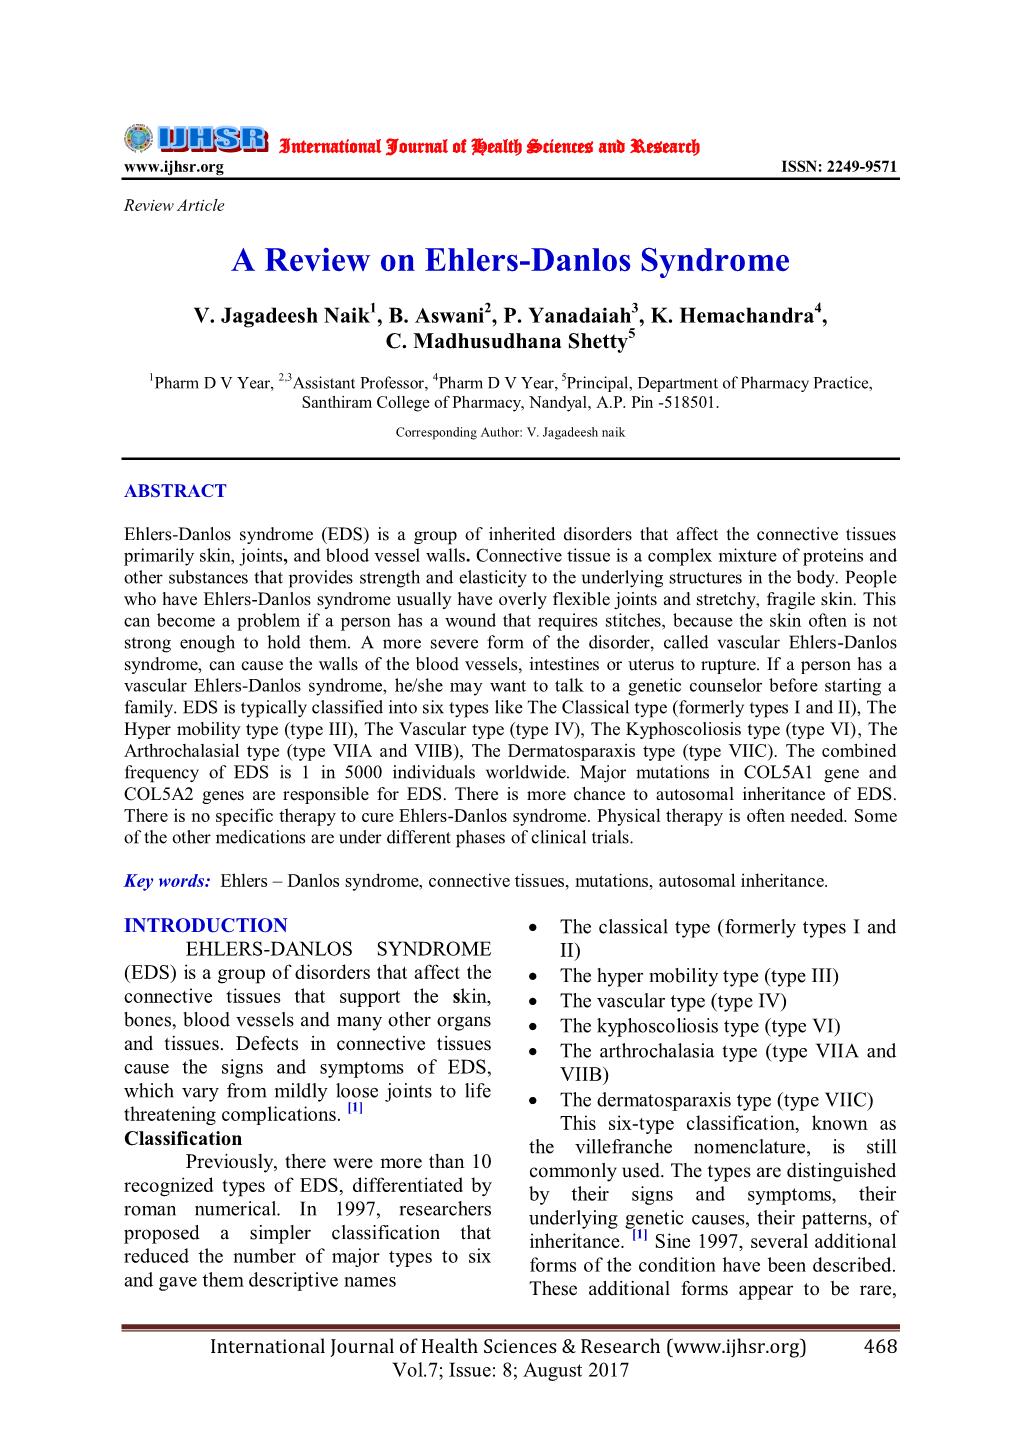 A Review on Ehlers-Danlos Syndrome